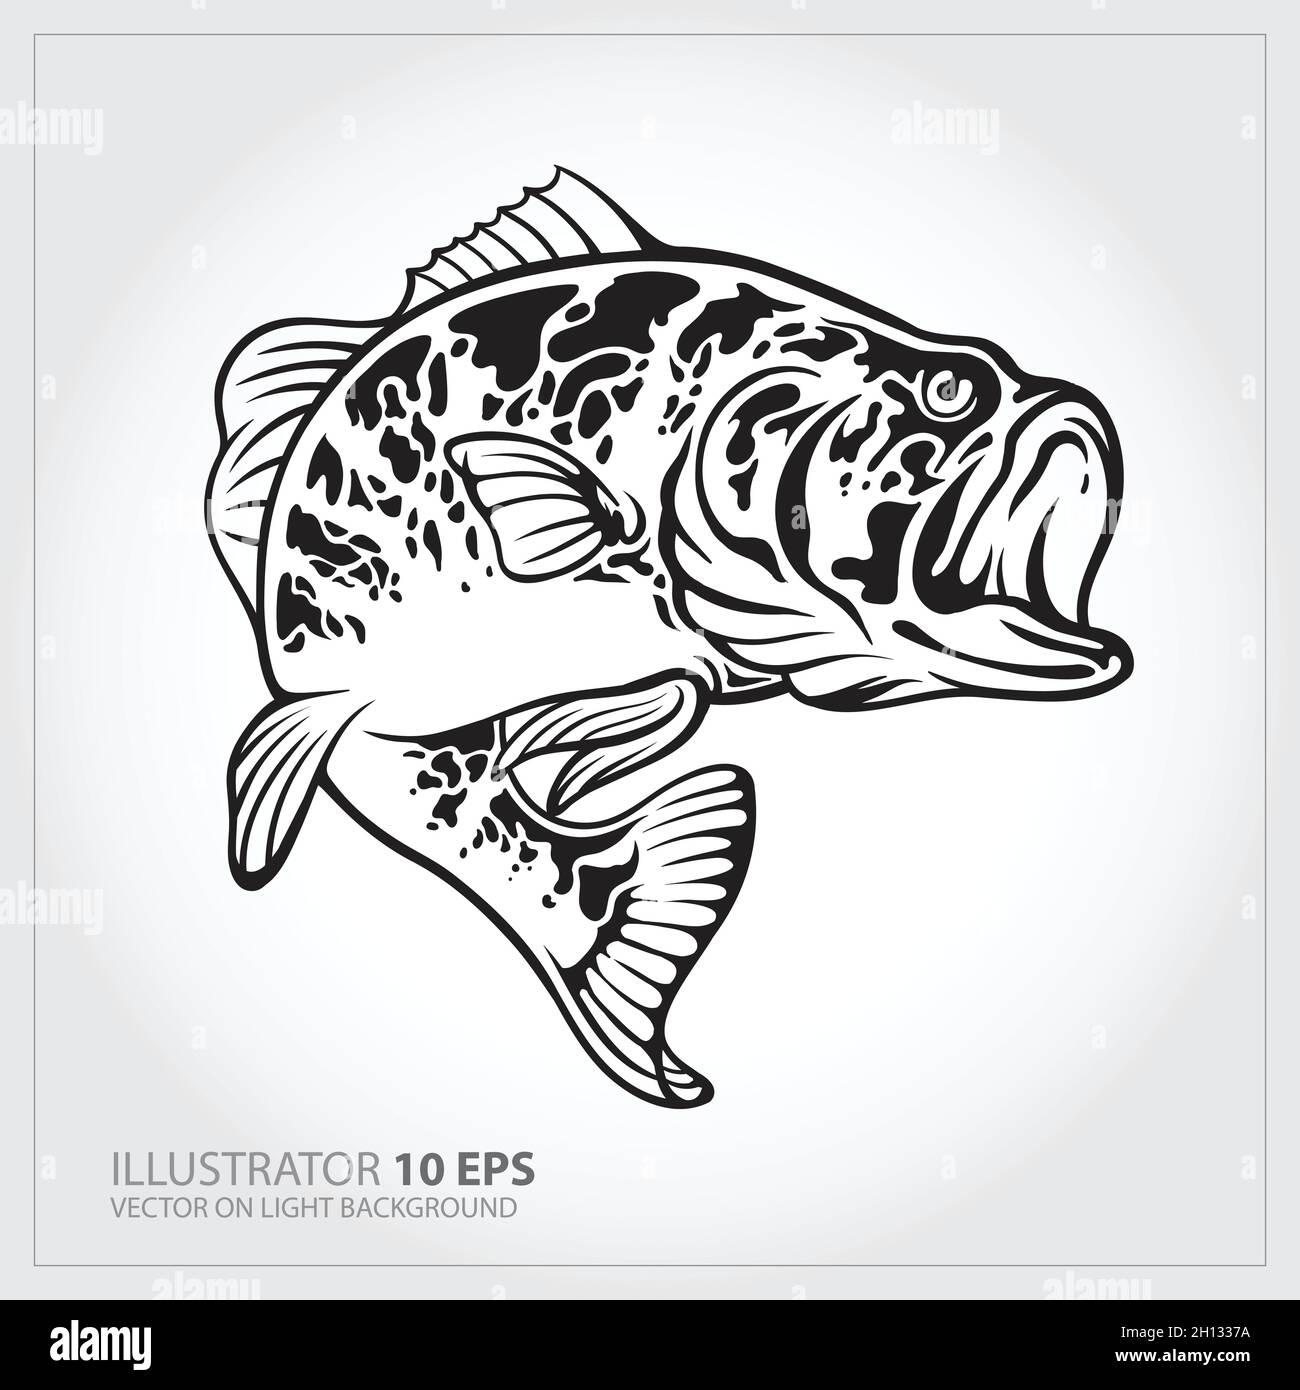 Vector Illustration of a largemouth bass fish jumping in white